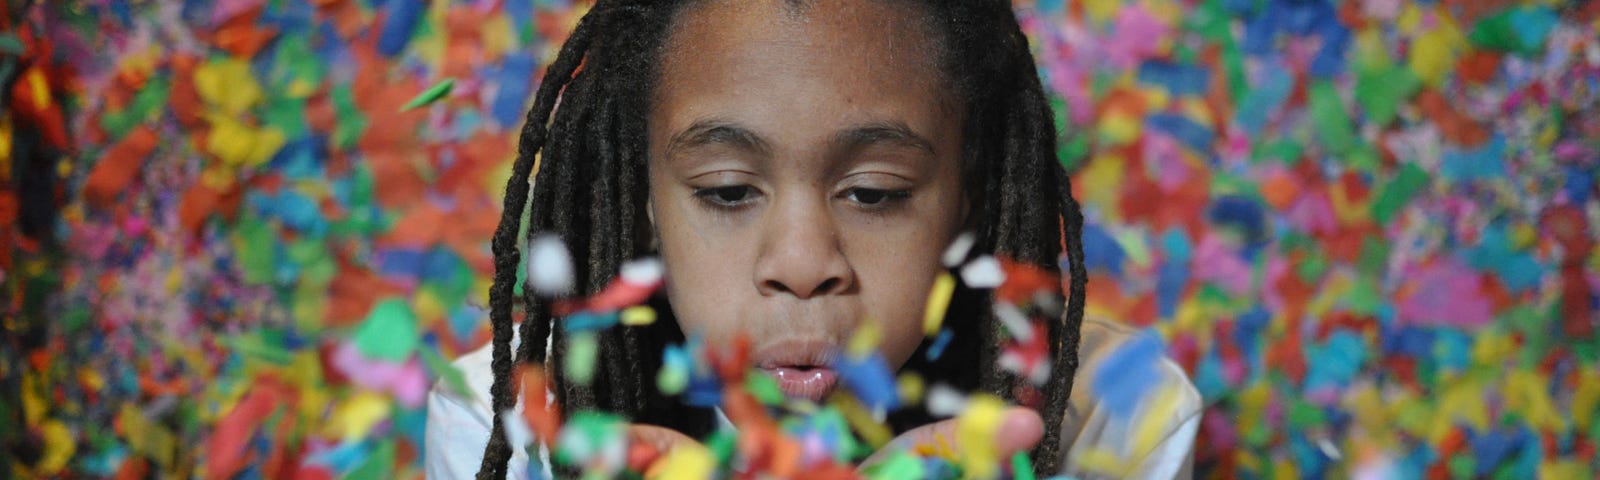 In front of a wall of confetti, a girl blows confetti from her hands to celebrate.